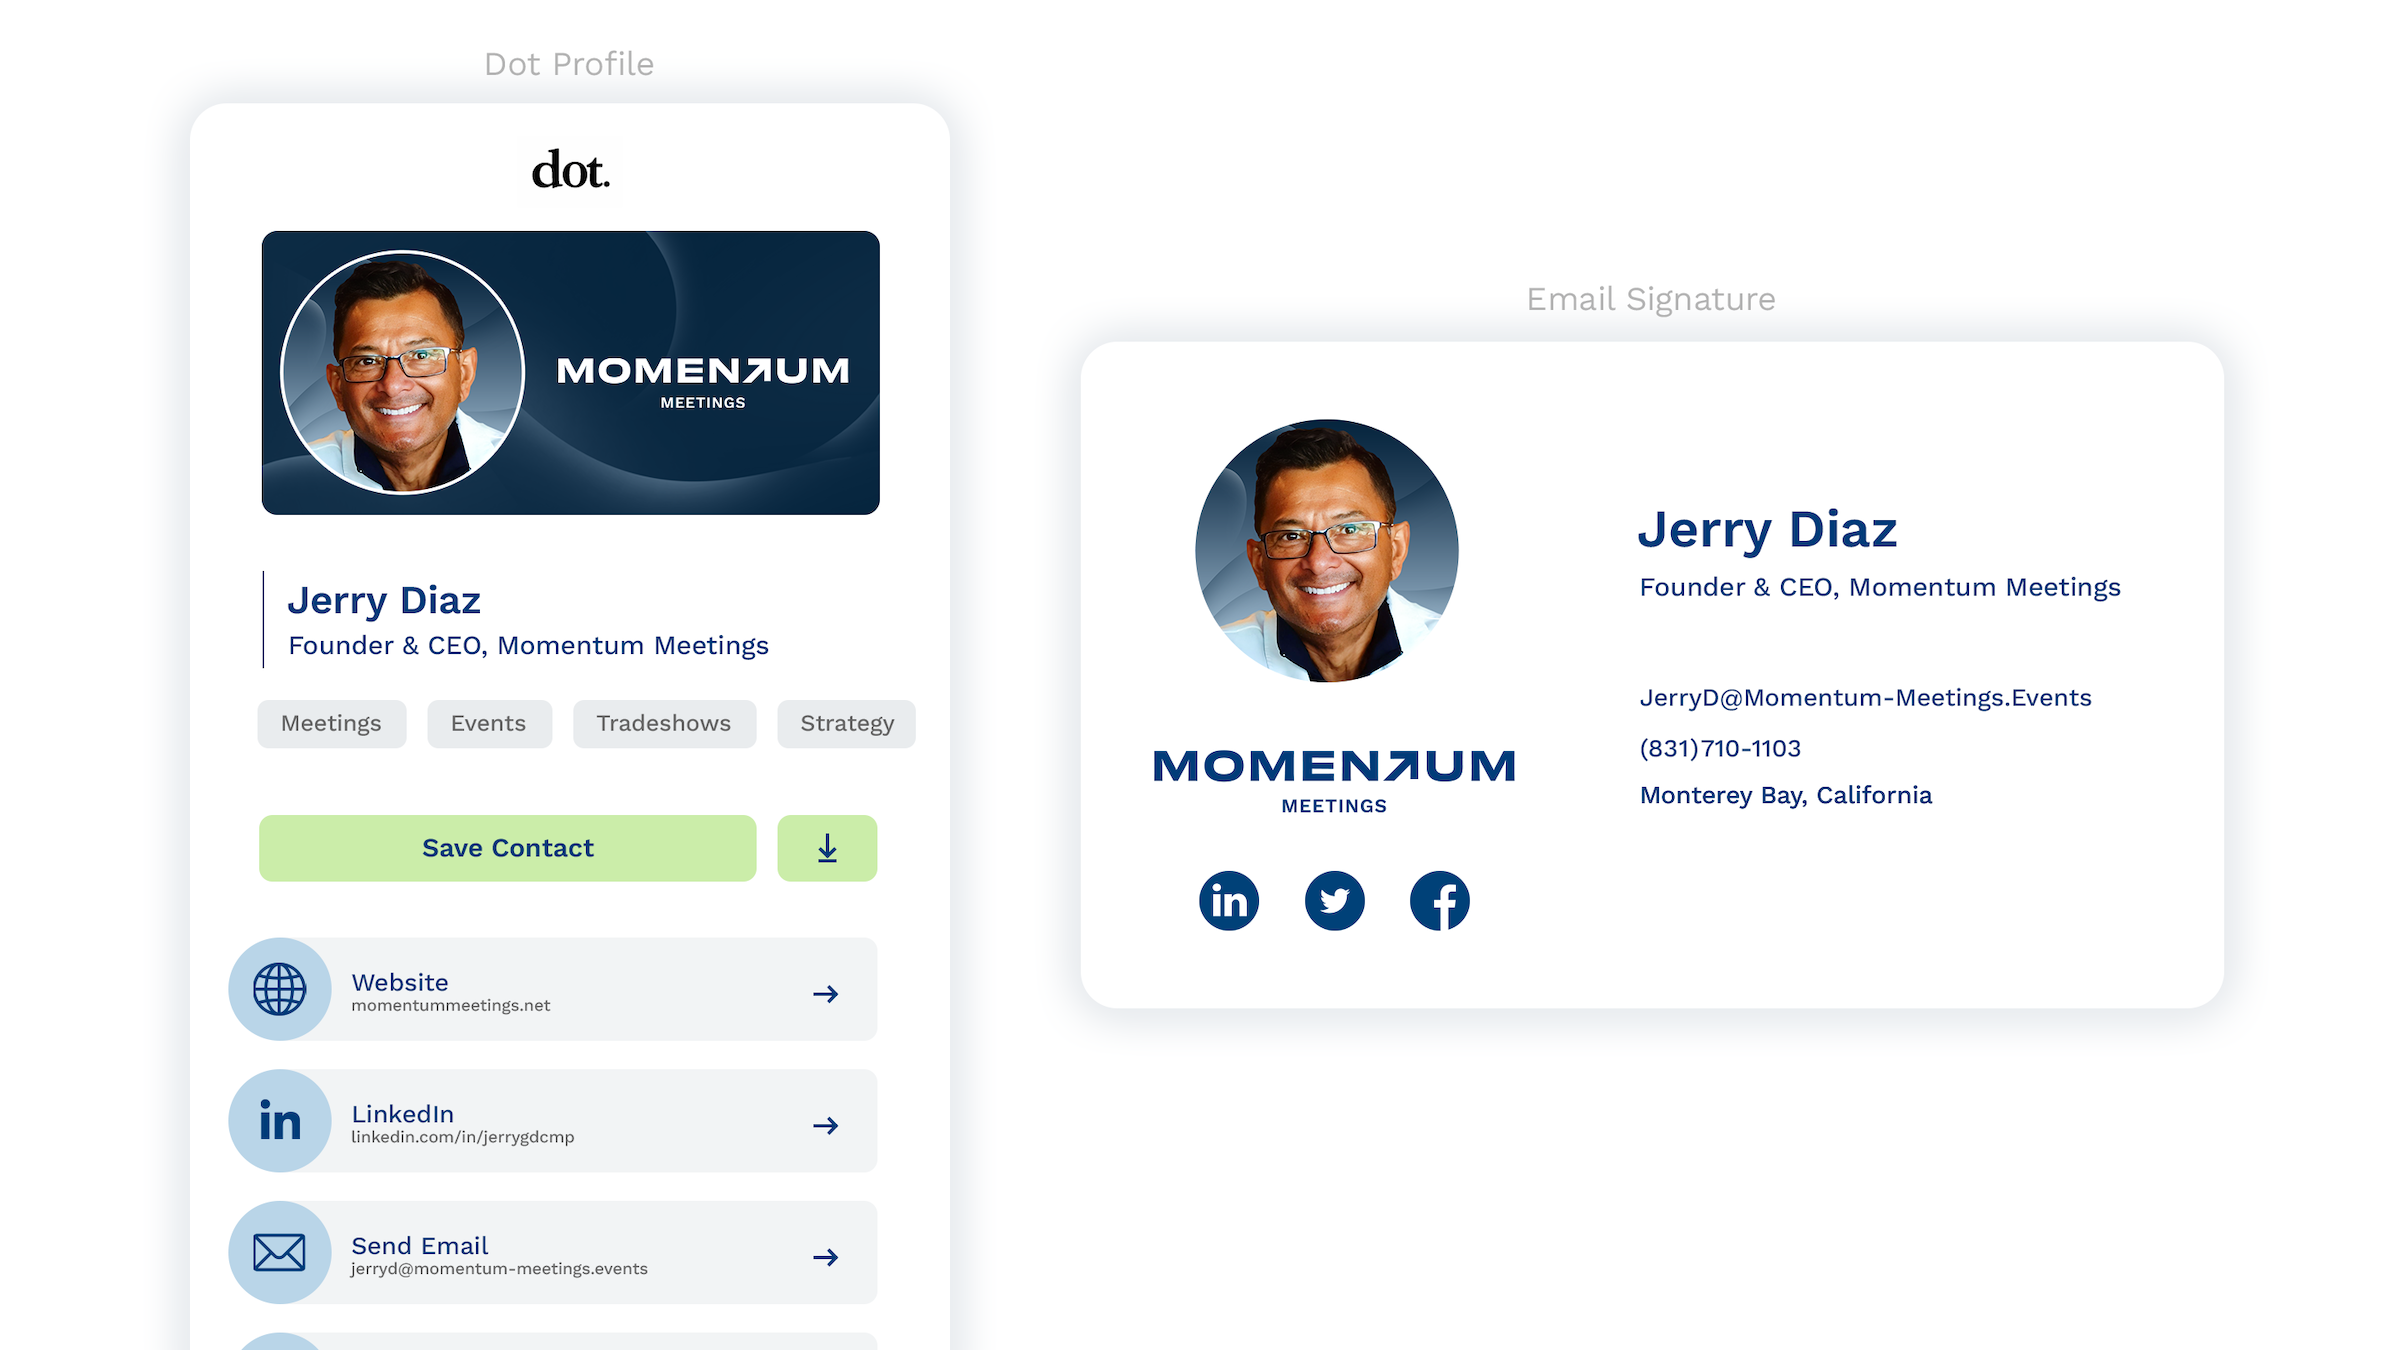 A snapshot of a branded Dot Card profile and customized email signature